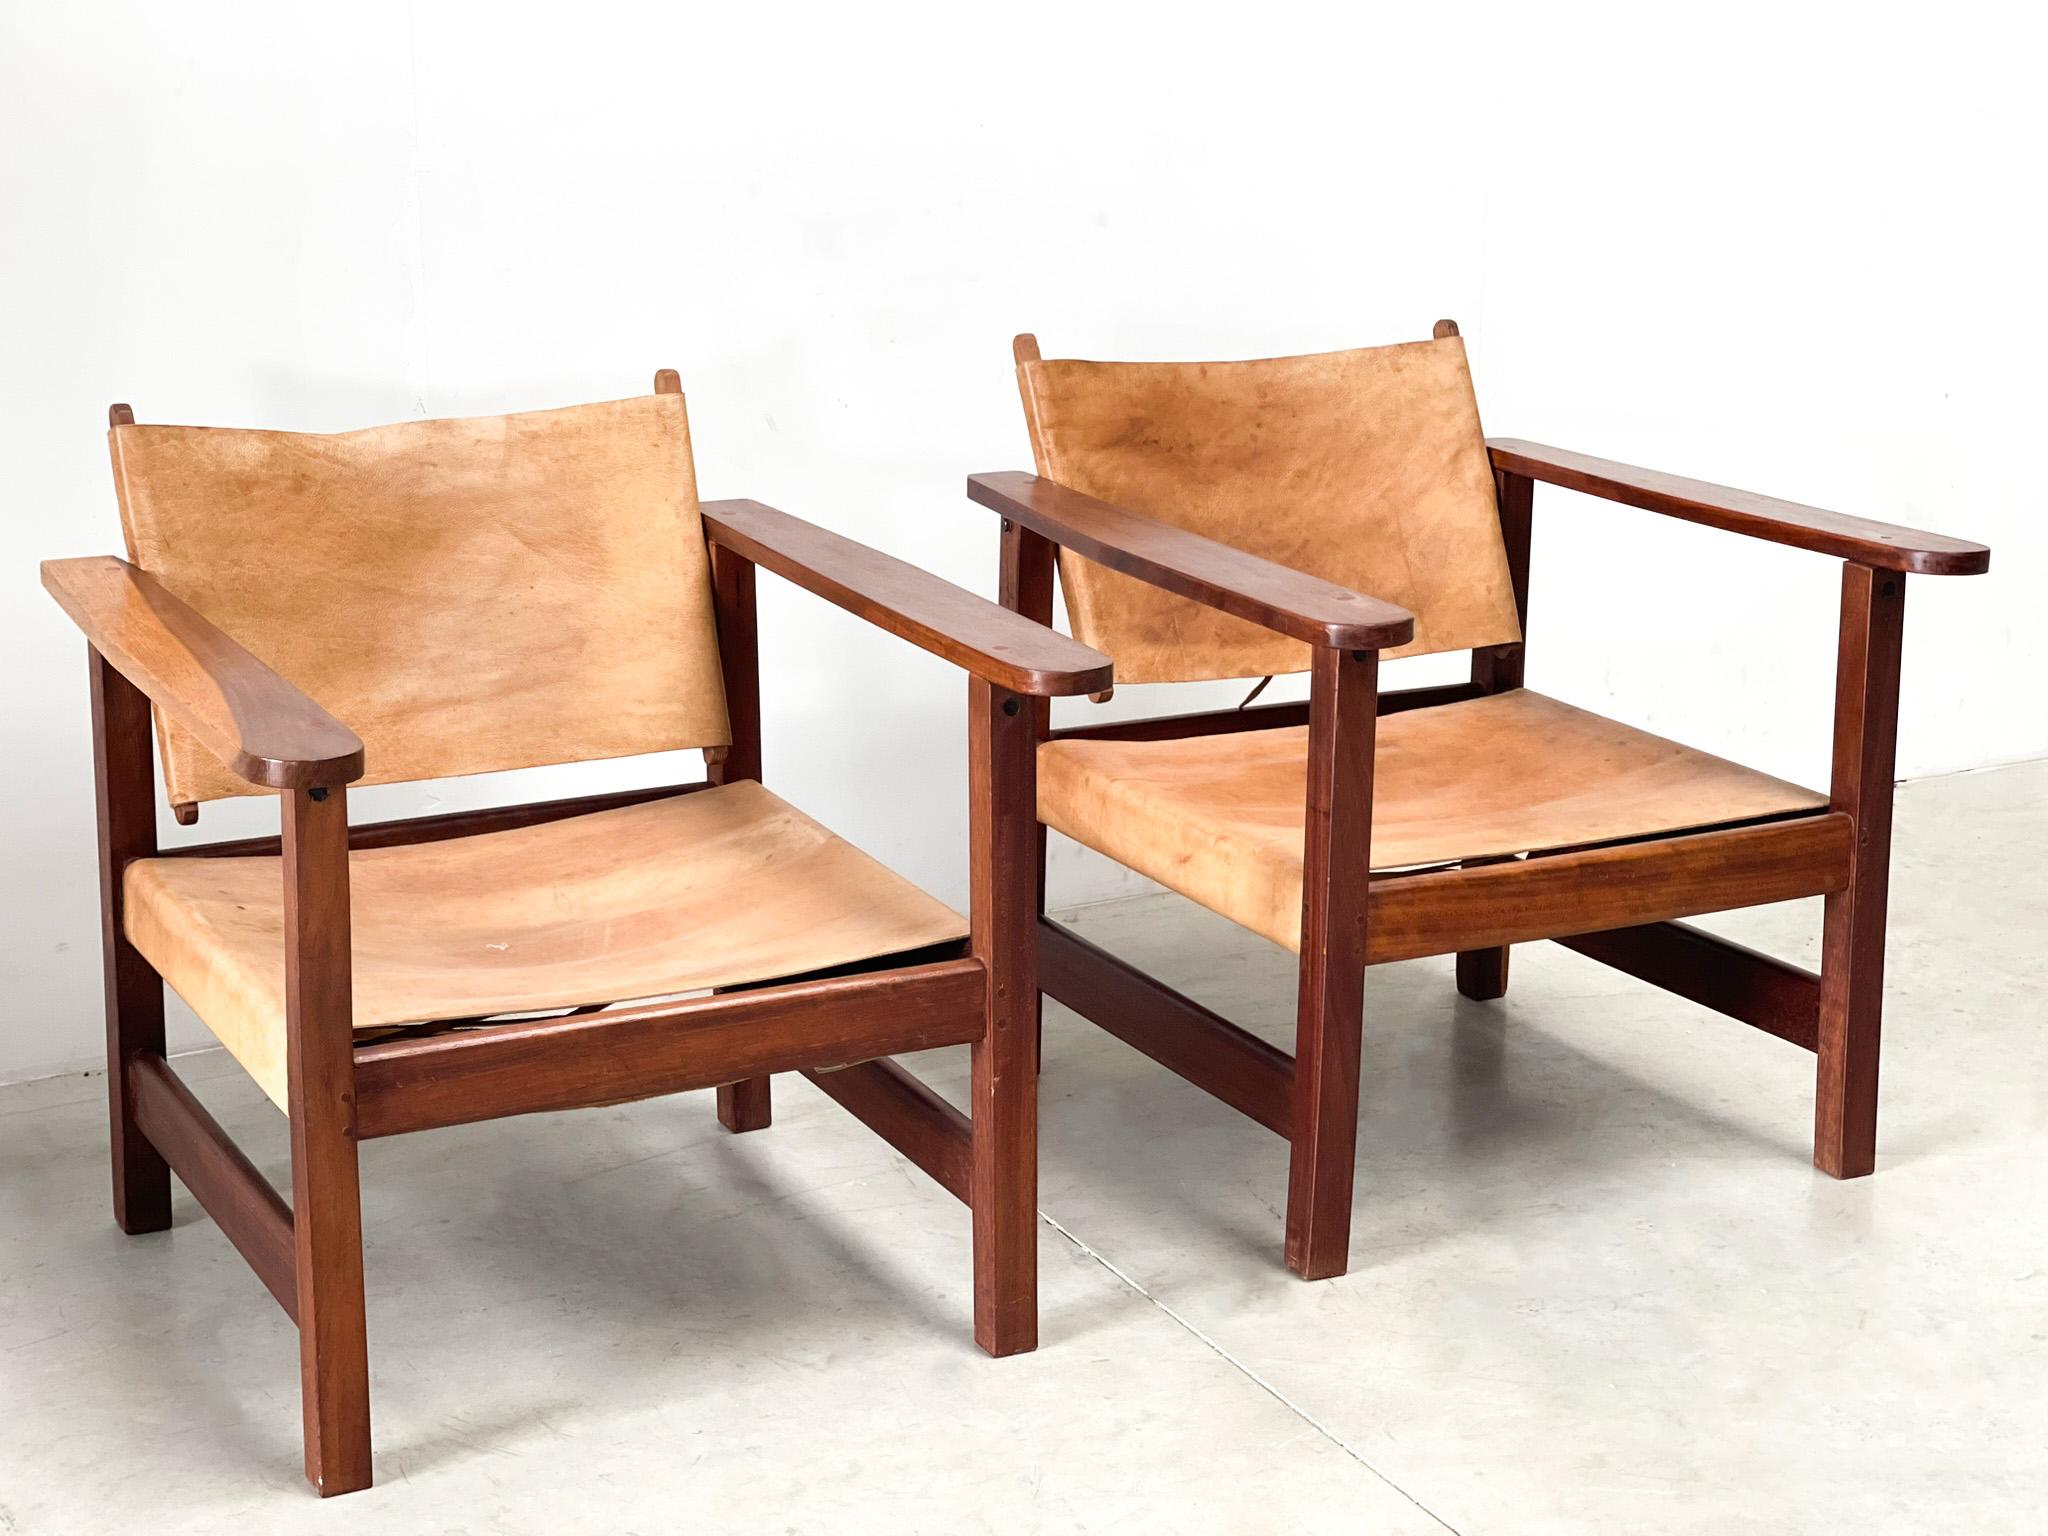 2 lounge chairs made most likely in thej 1950s in Germany. Unfortunately we do not know who designed these chairs. It must have been a small edition from a manufacturer. They both have very nice leather with just the right patina. They are in